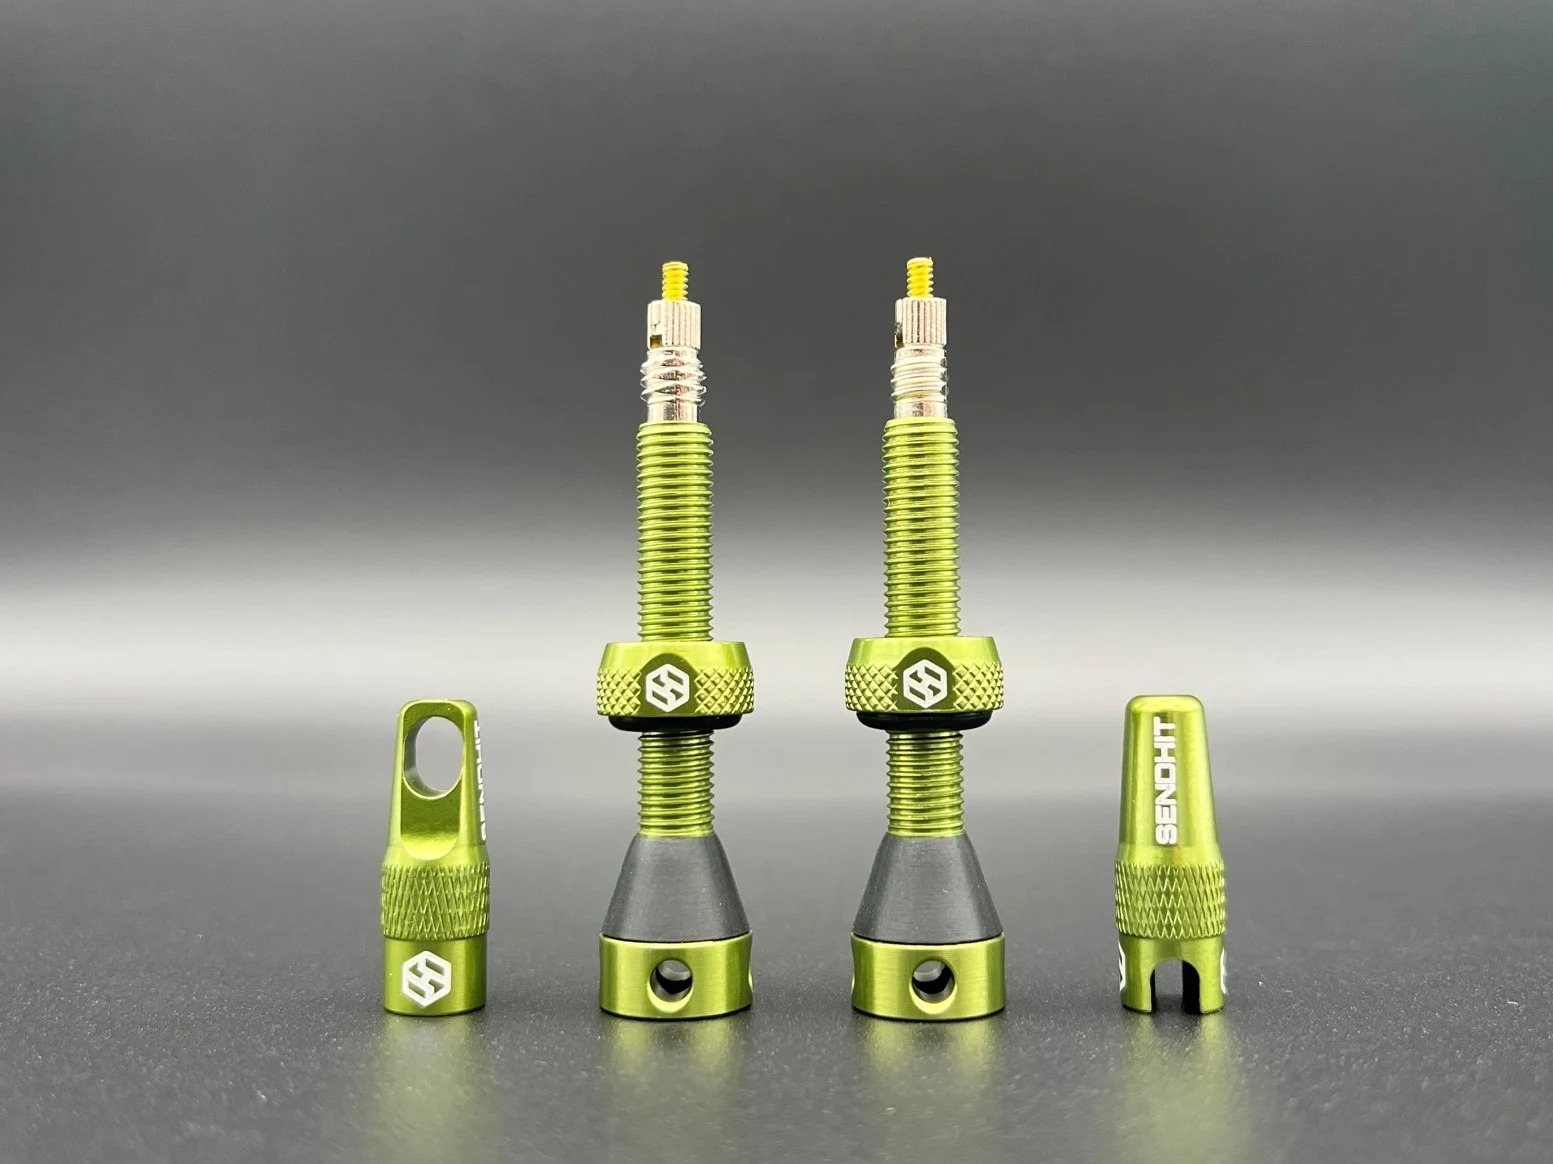 New SendHit valves with integrated tool